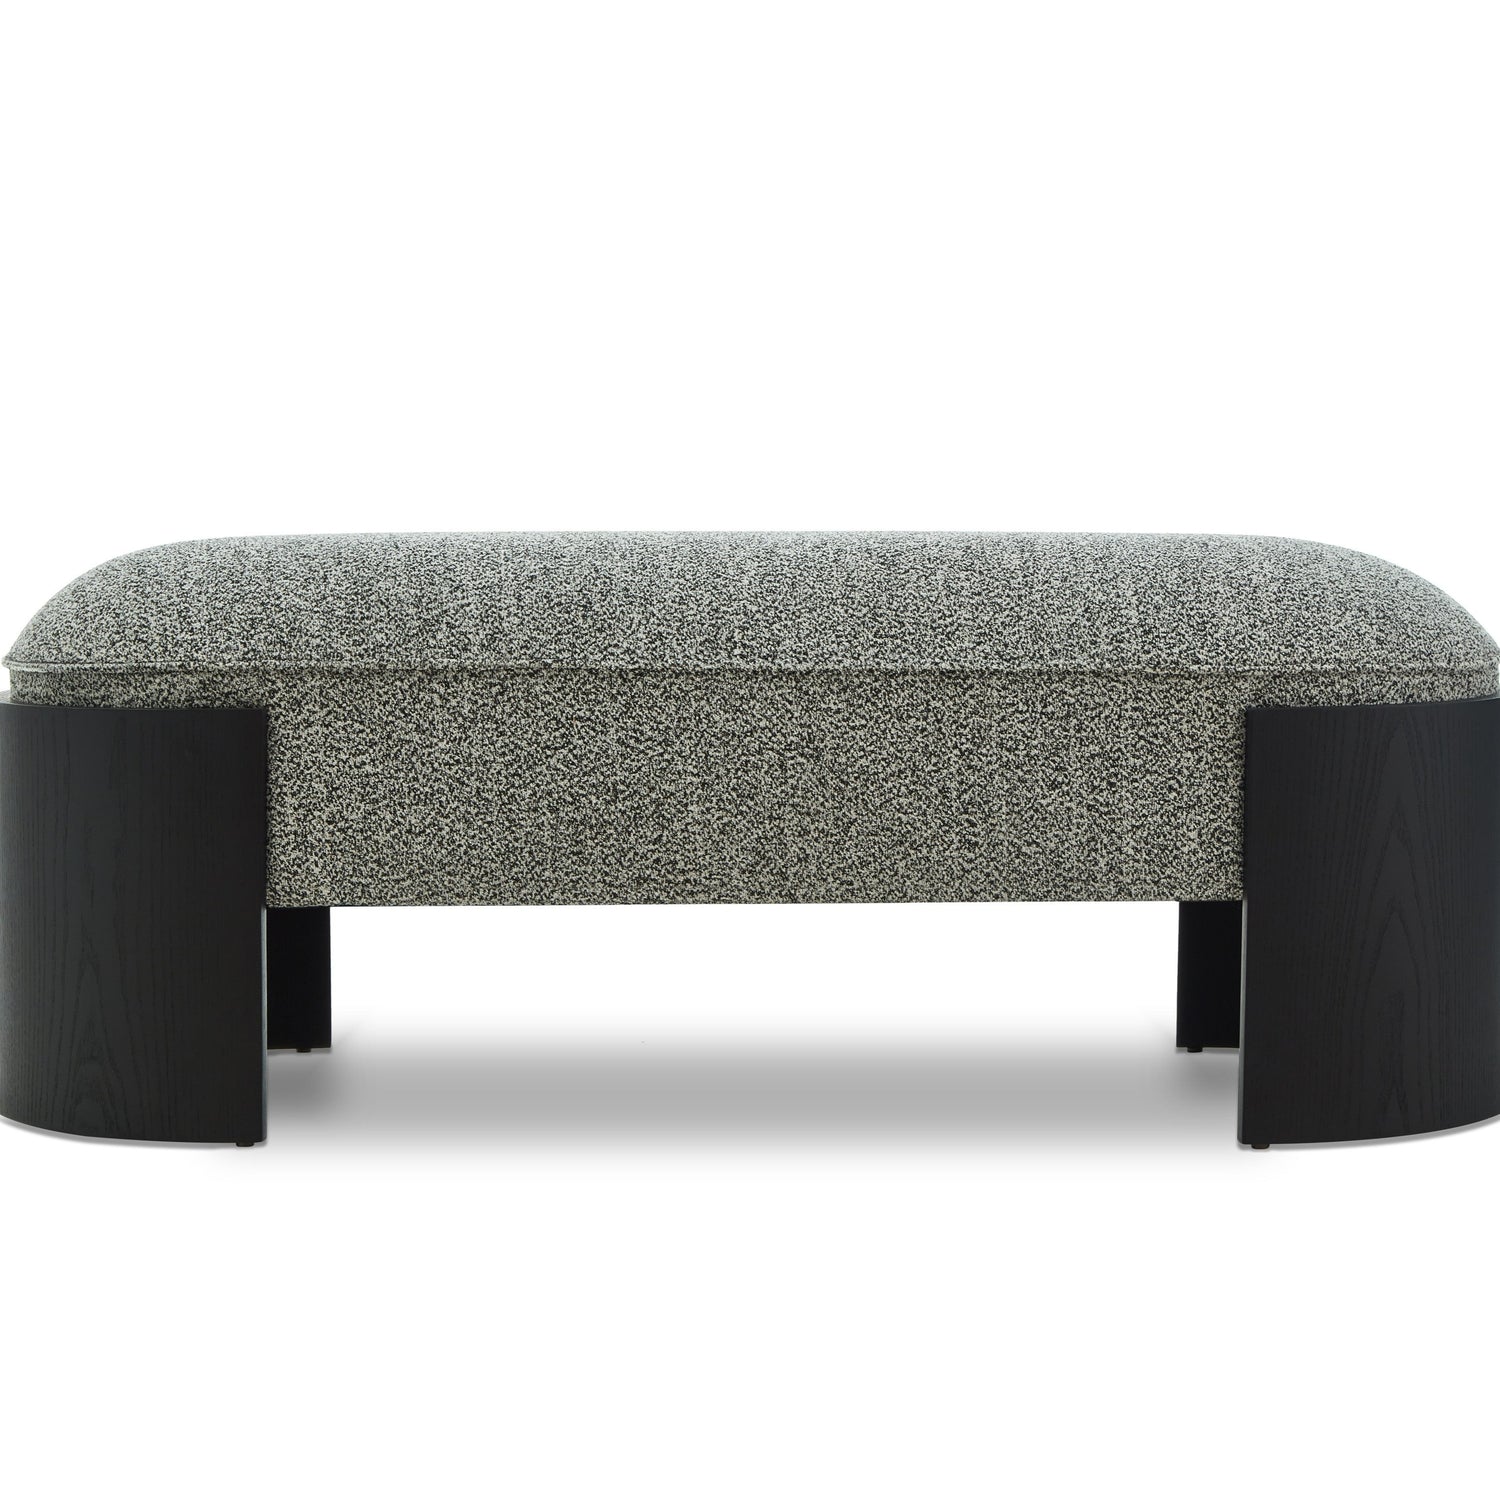  LiangAndEimil-Liang & Eimil Ed Long Bench in Cordoba Speckle Grey-Grey 309 